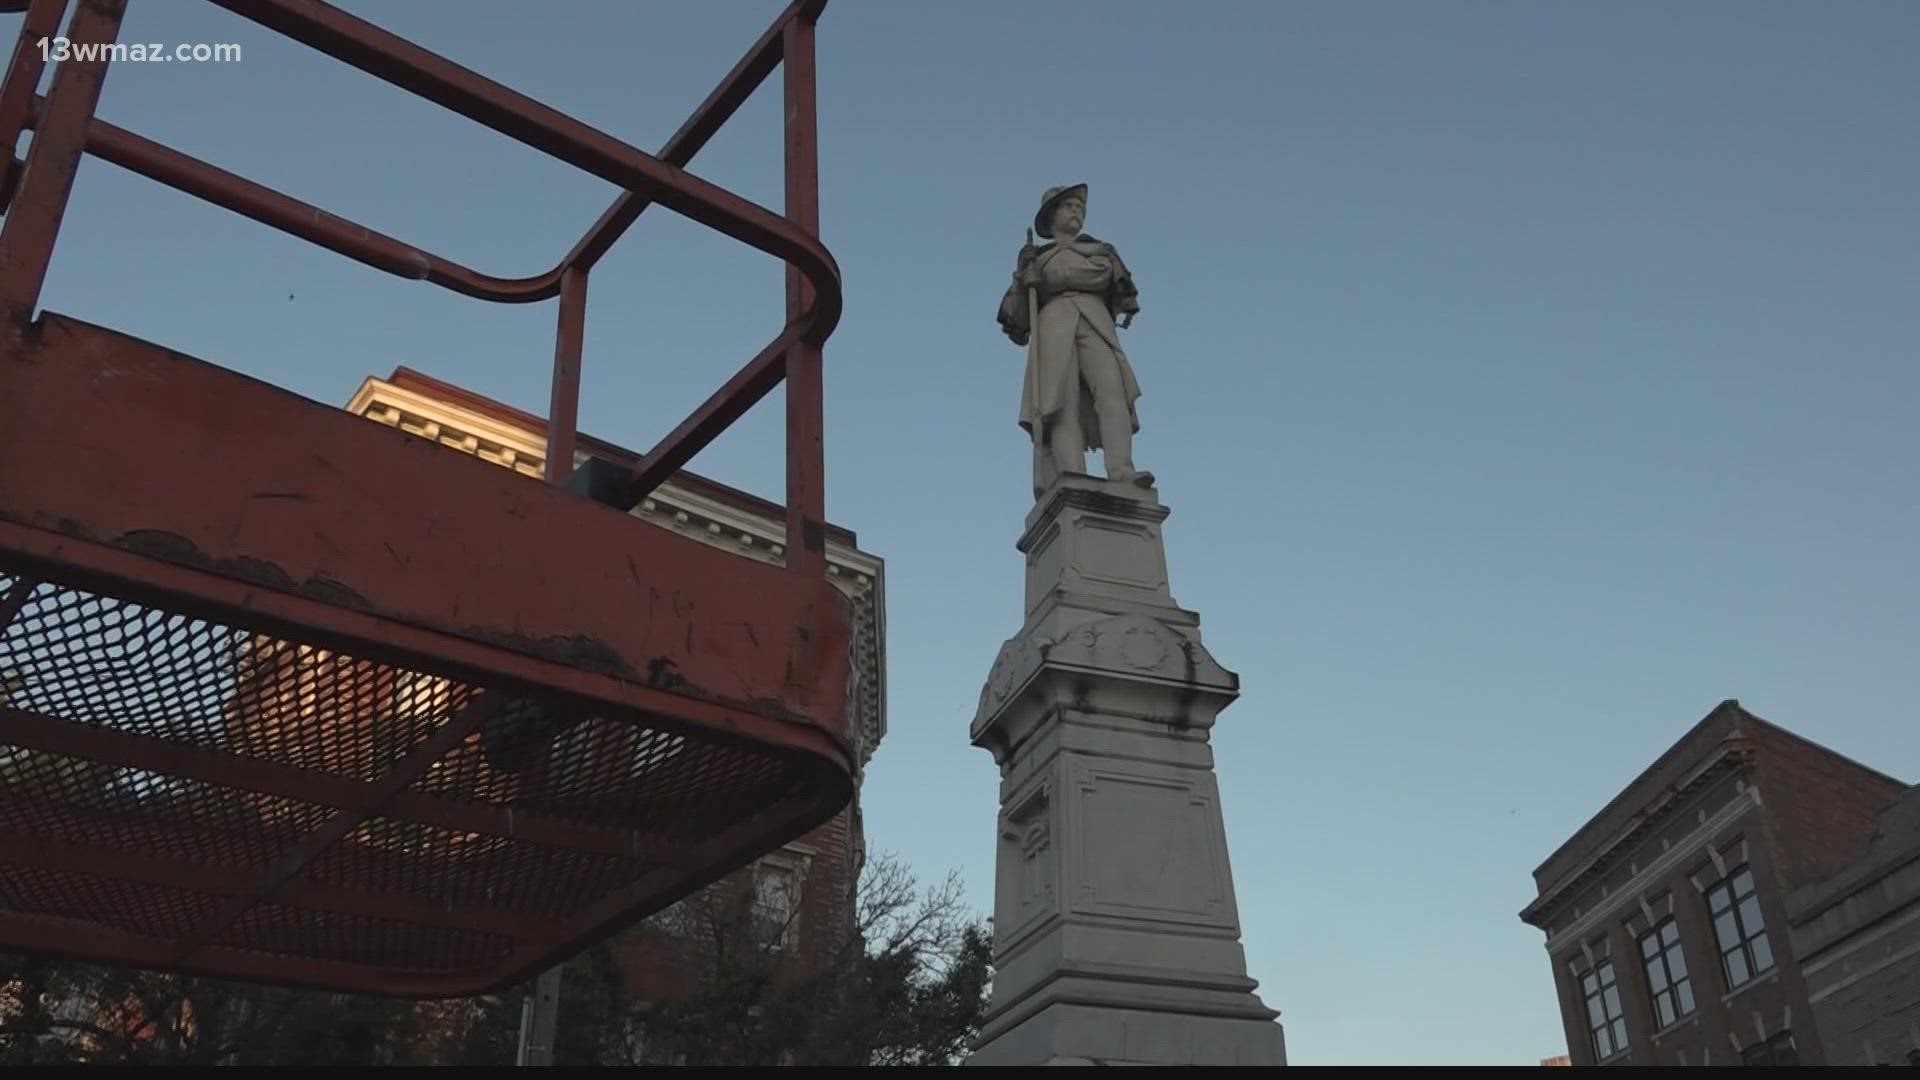 A Macon man stayed the night at the Confederate statue on Cotton Avenue in protest of it being moved on Wednesday.